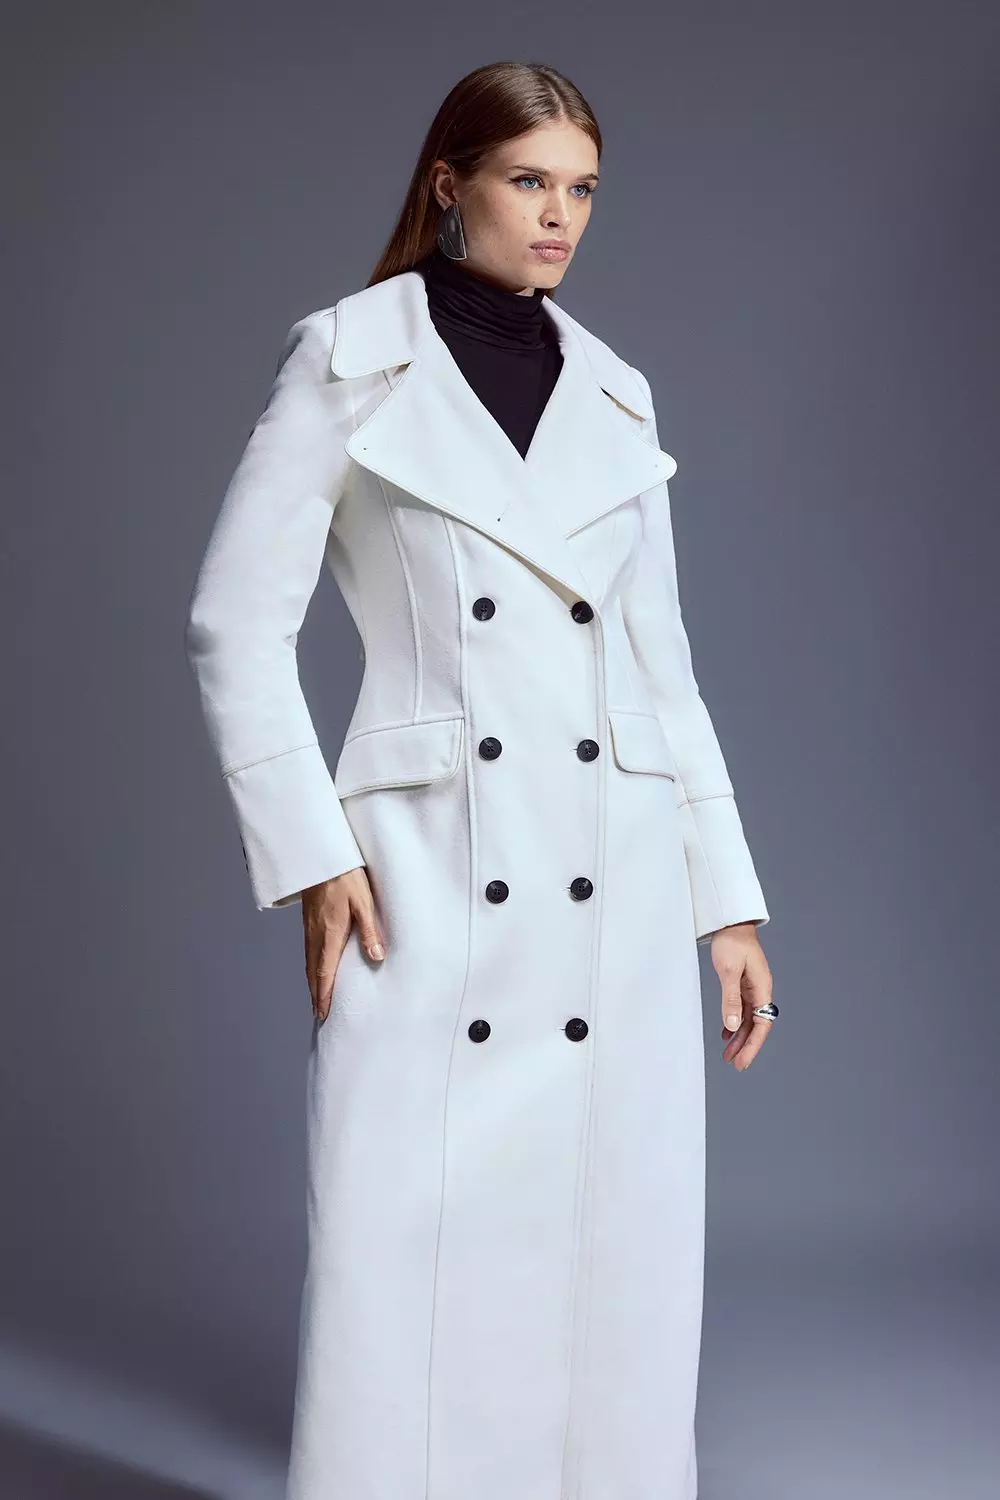 CASHMERE BLEND DOUBLE TAILORED COAT